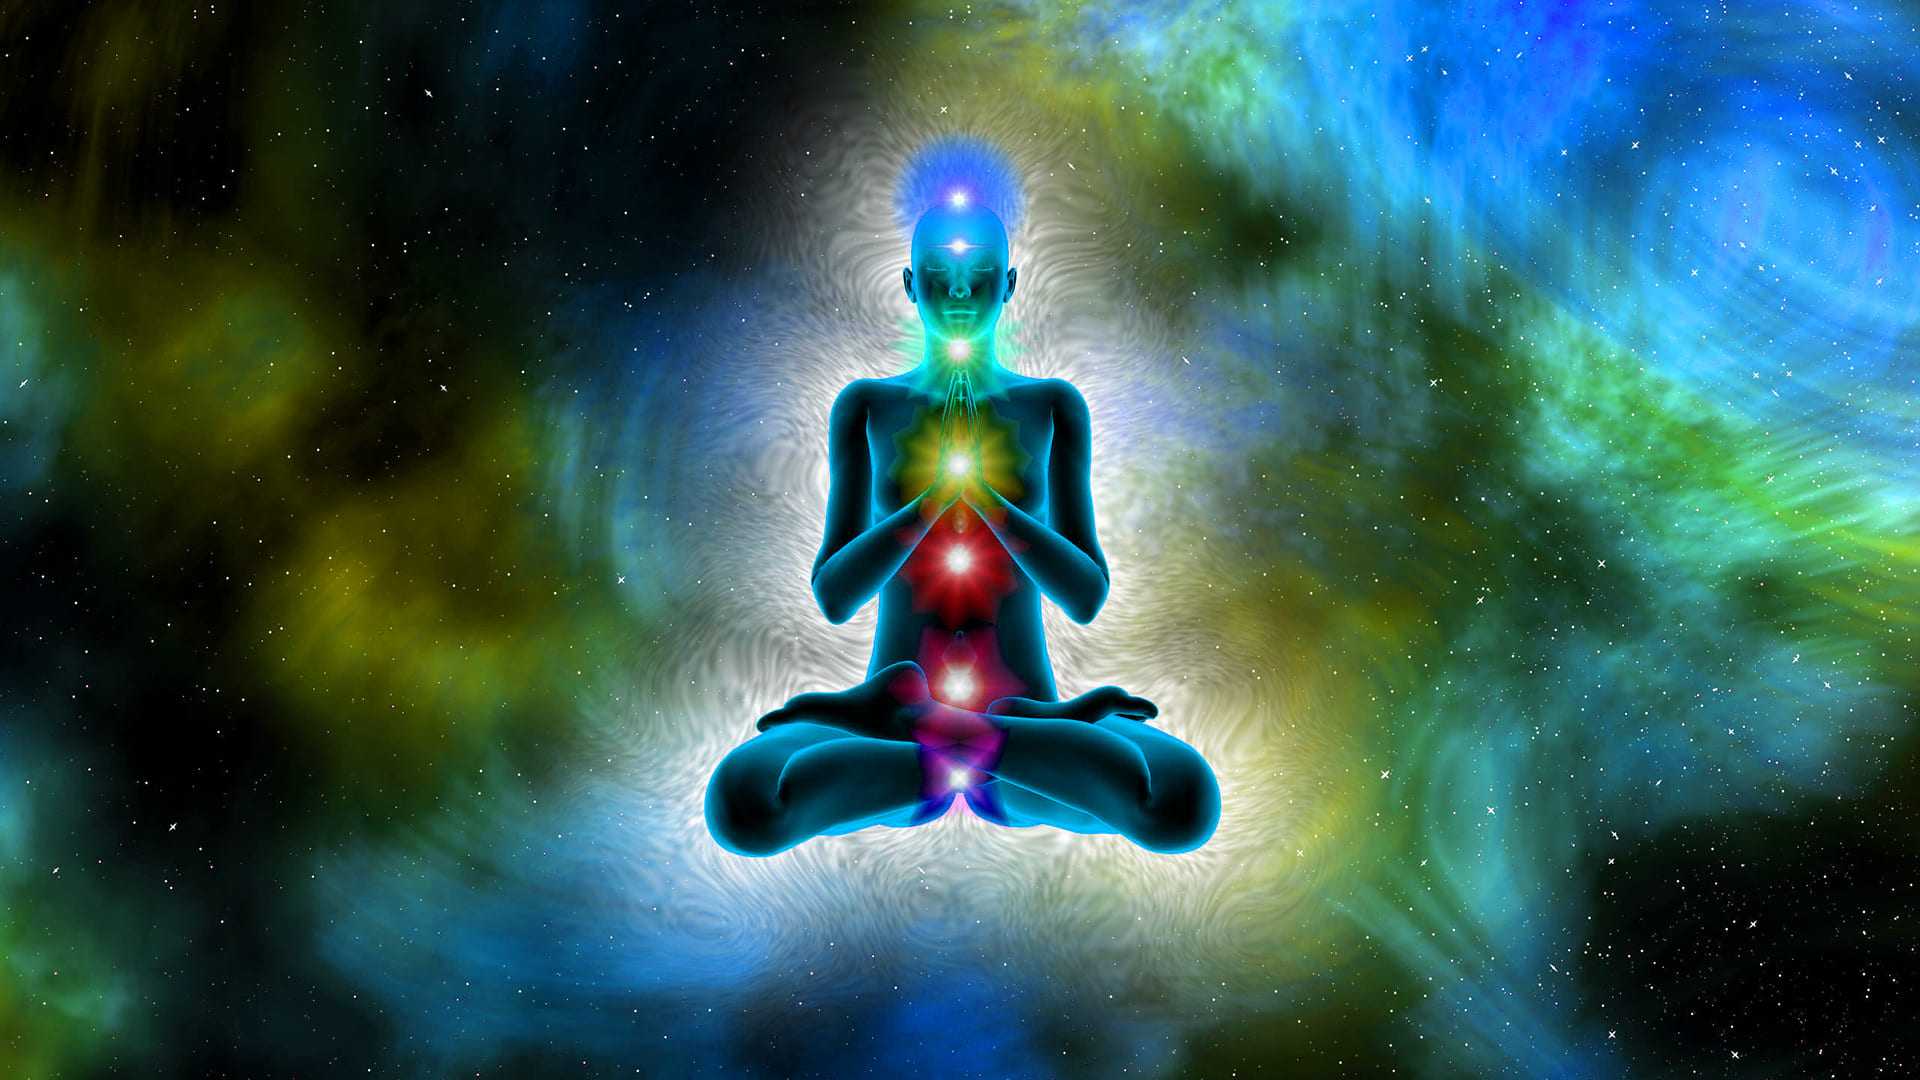 A person meditating with the 7 chakras in the right position - Spiritual